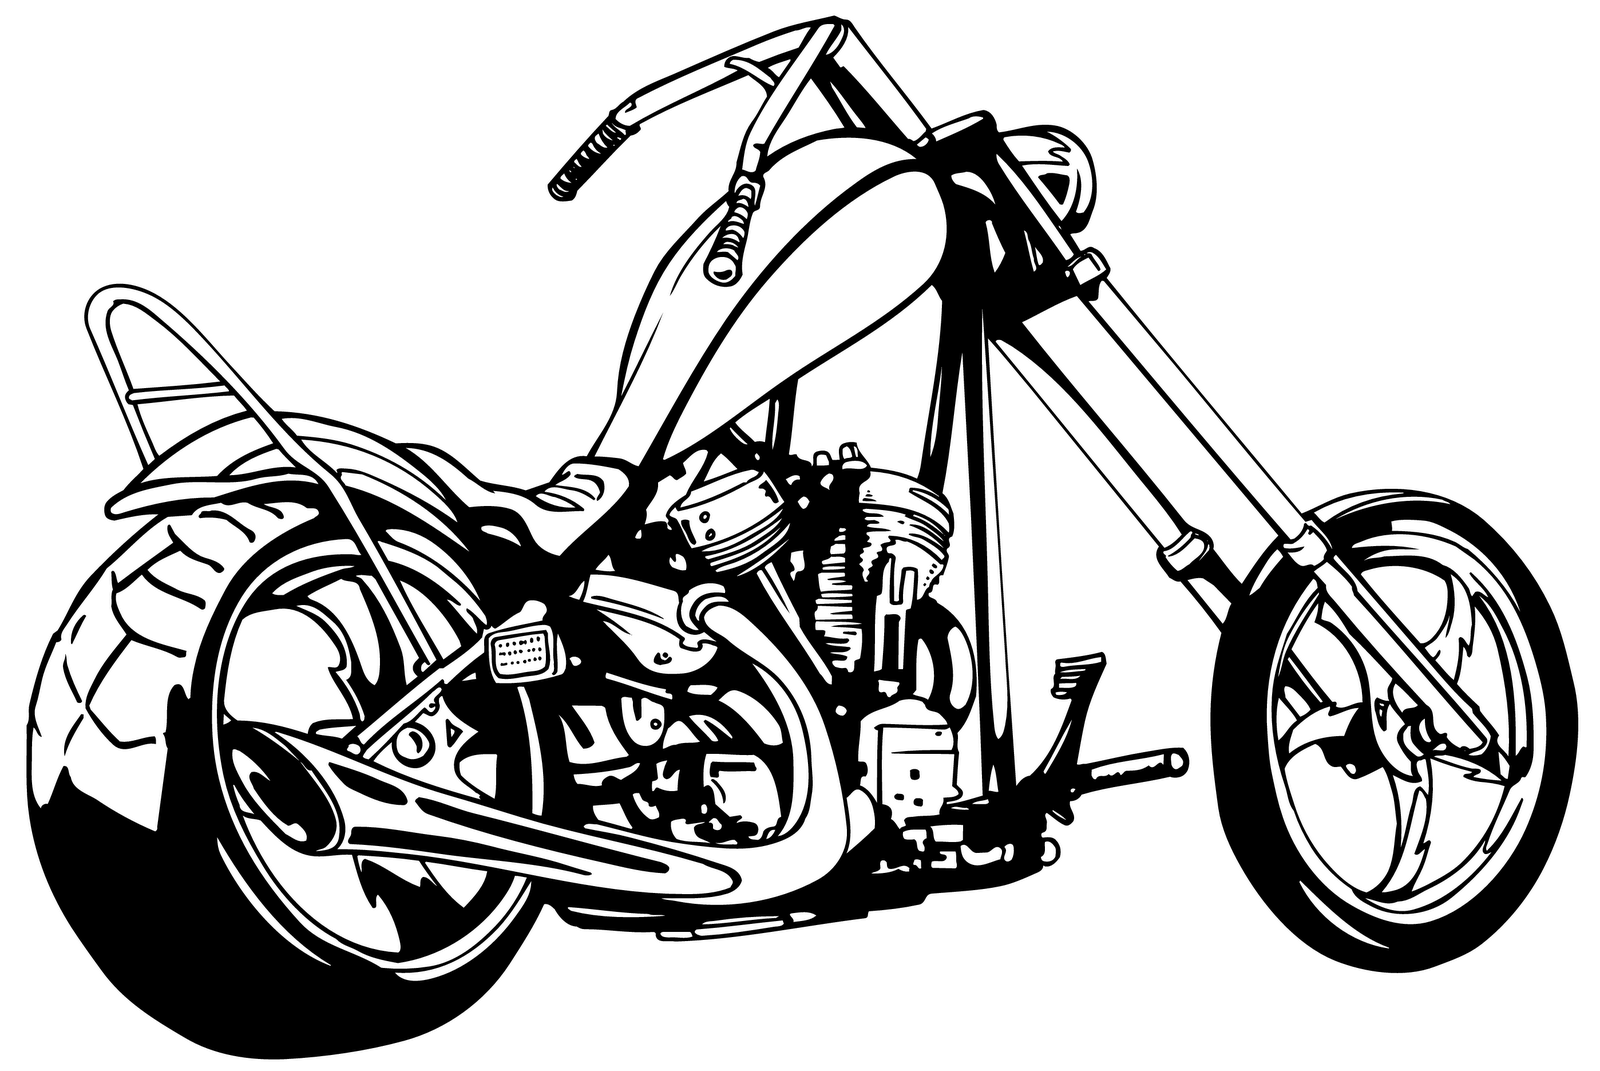 This hot motorcycle clip art 